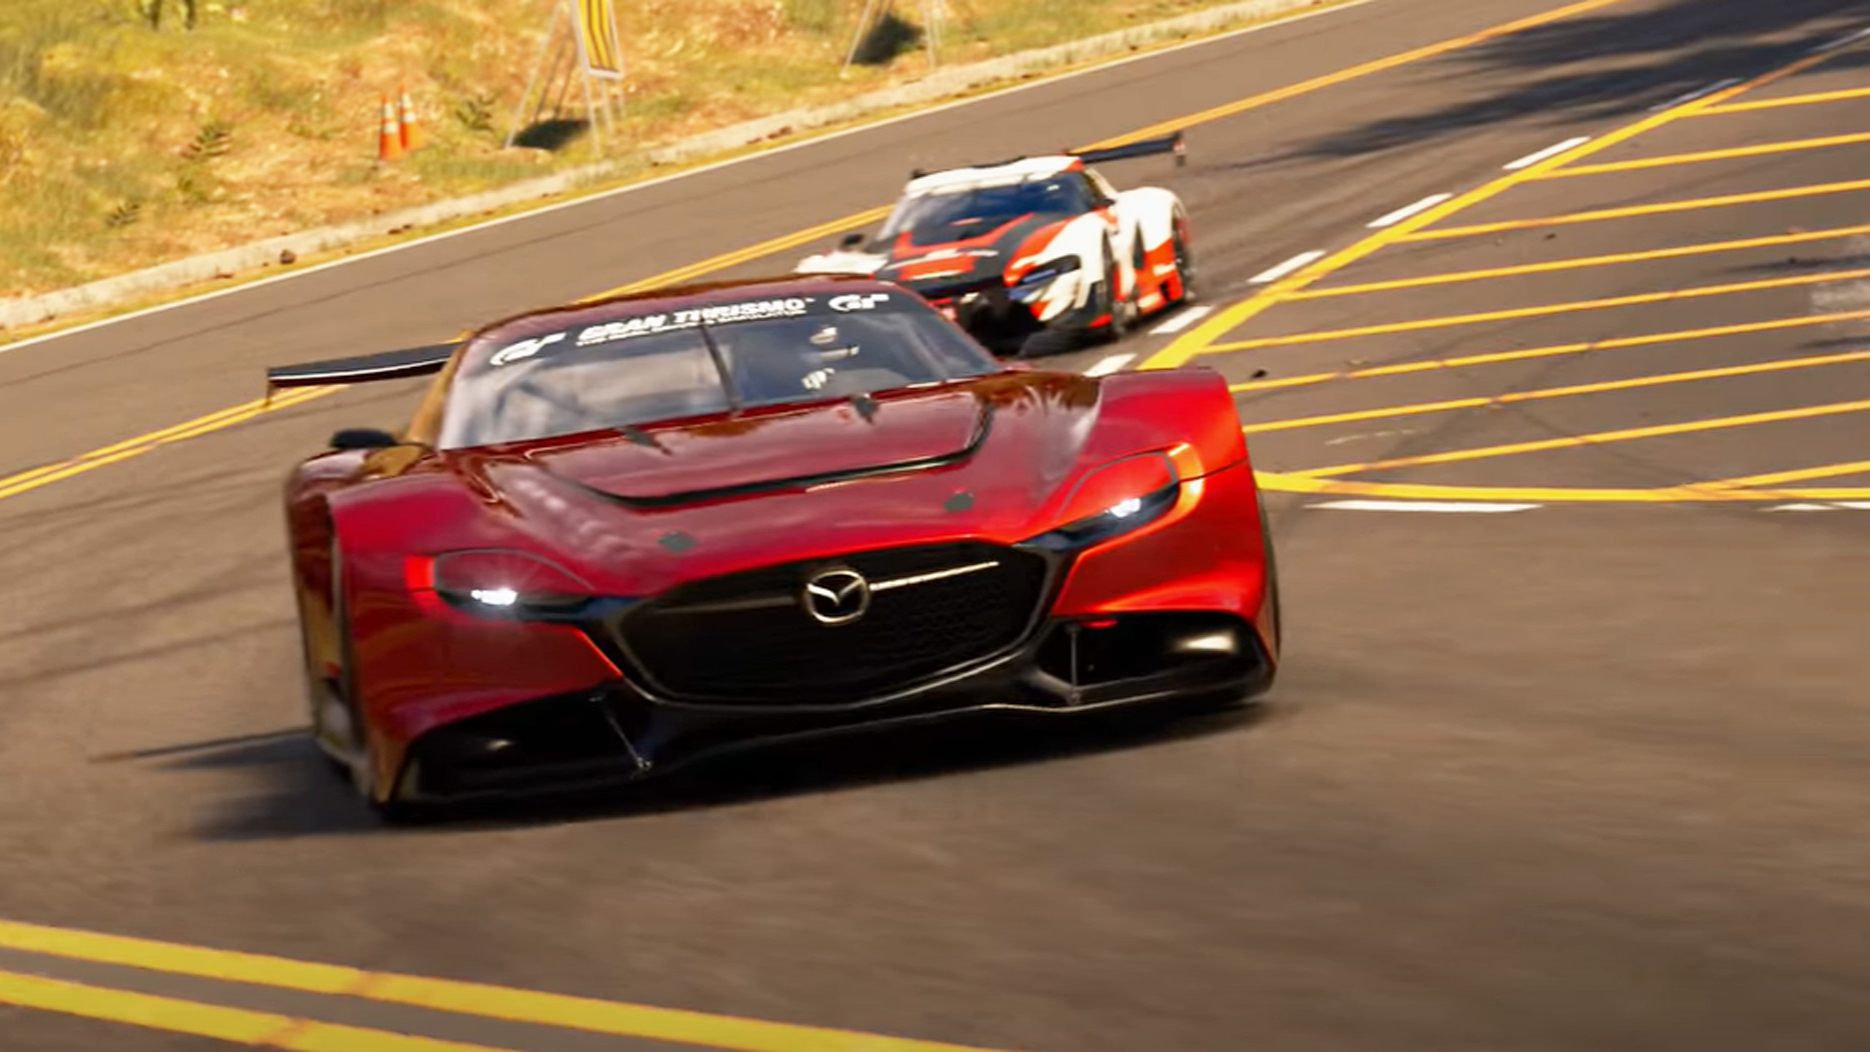 Gran Turismo 7 gameplay showing a red Mazda driving round a track in front of another car